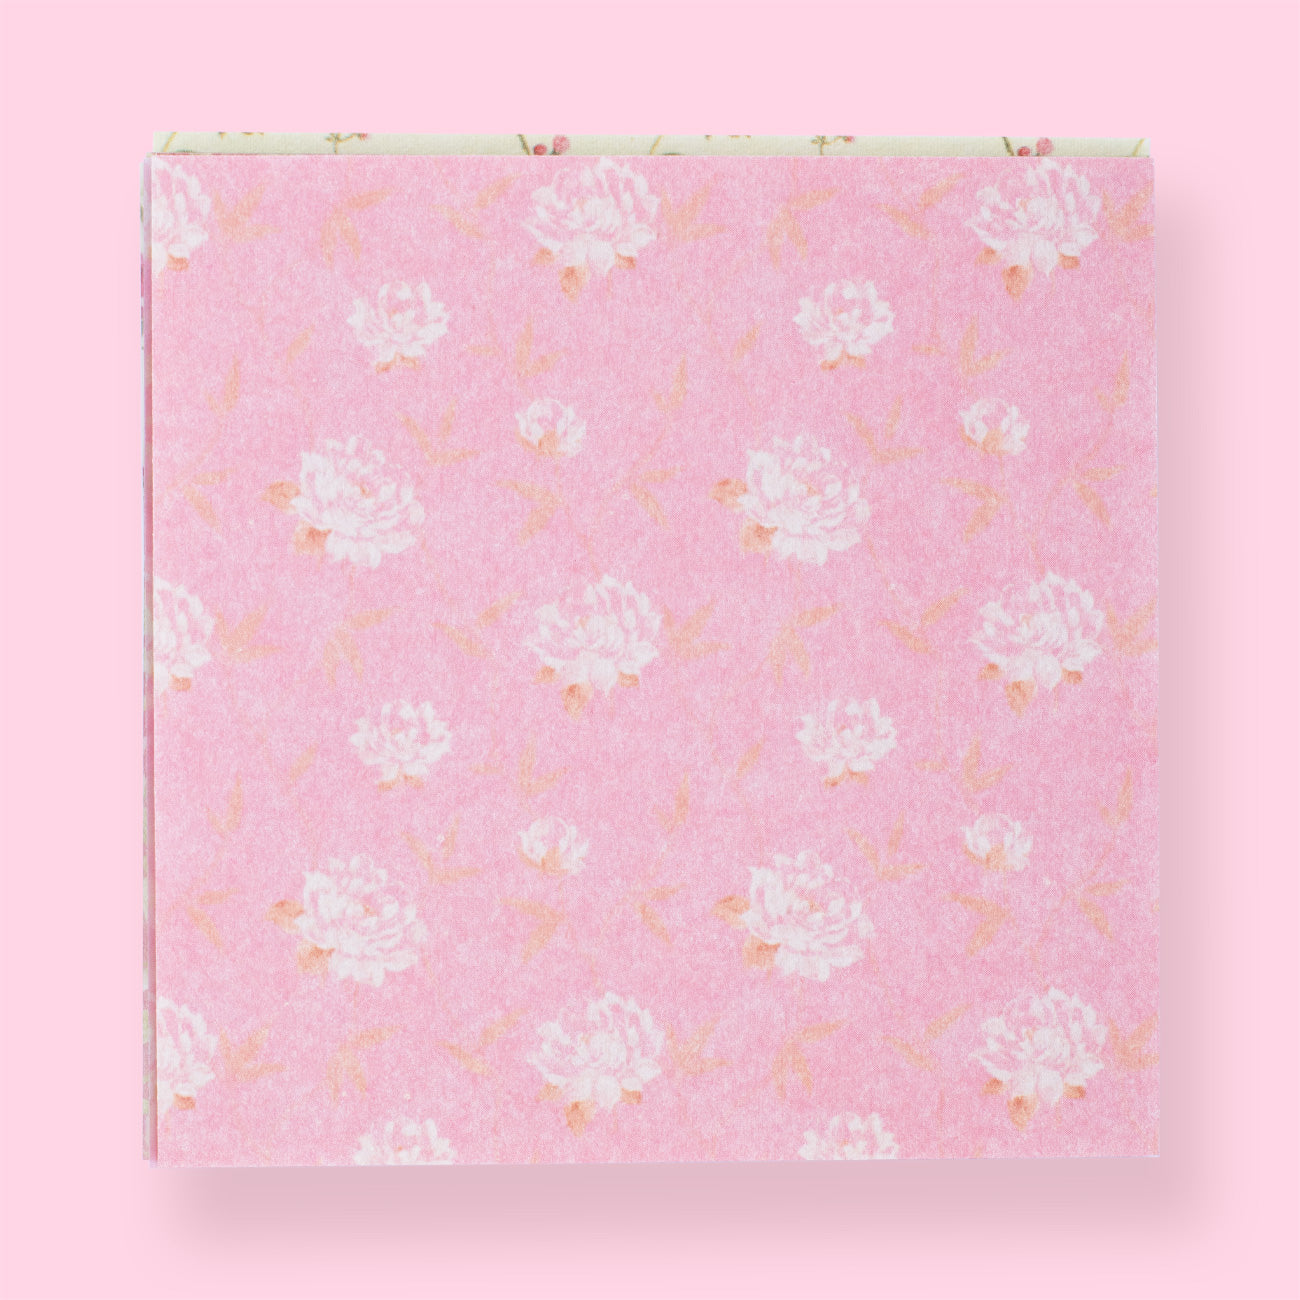 Flower Deco Scrapbooking Paper Pack - Giverny